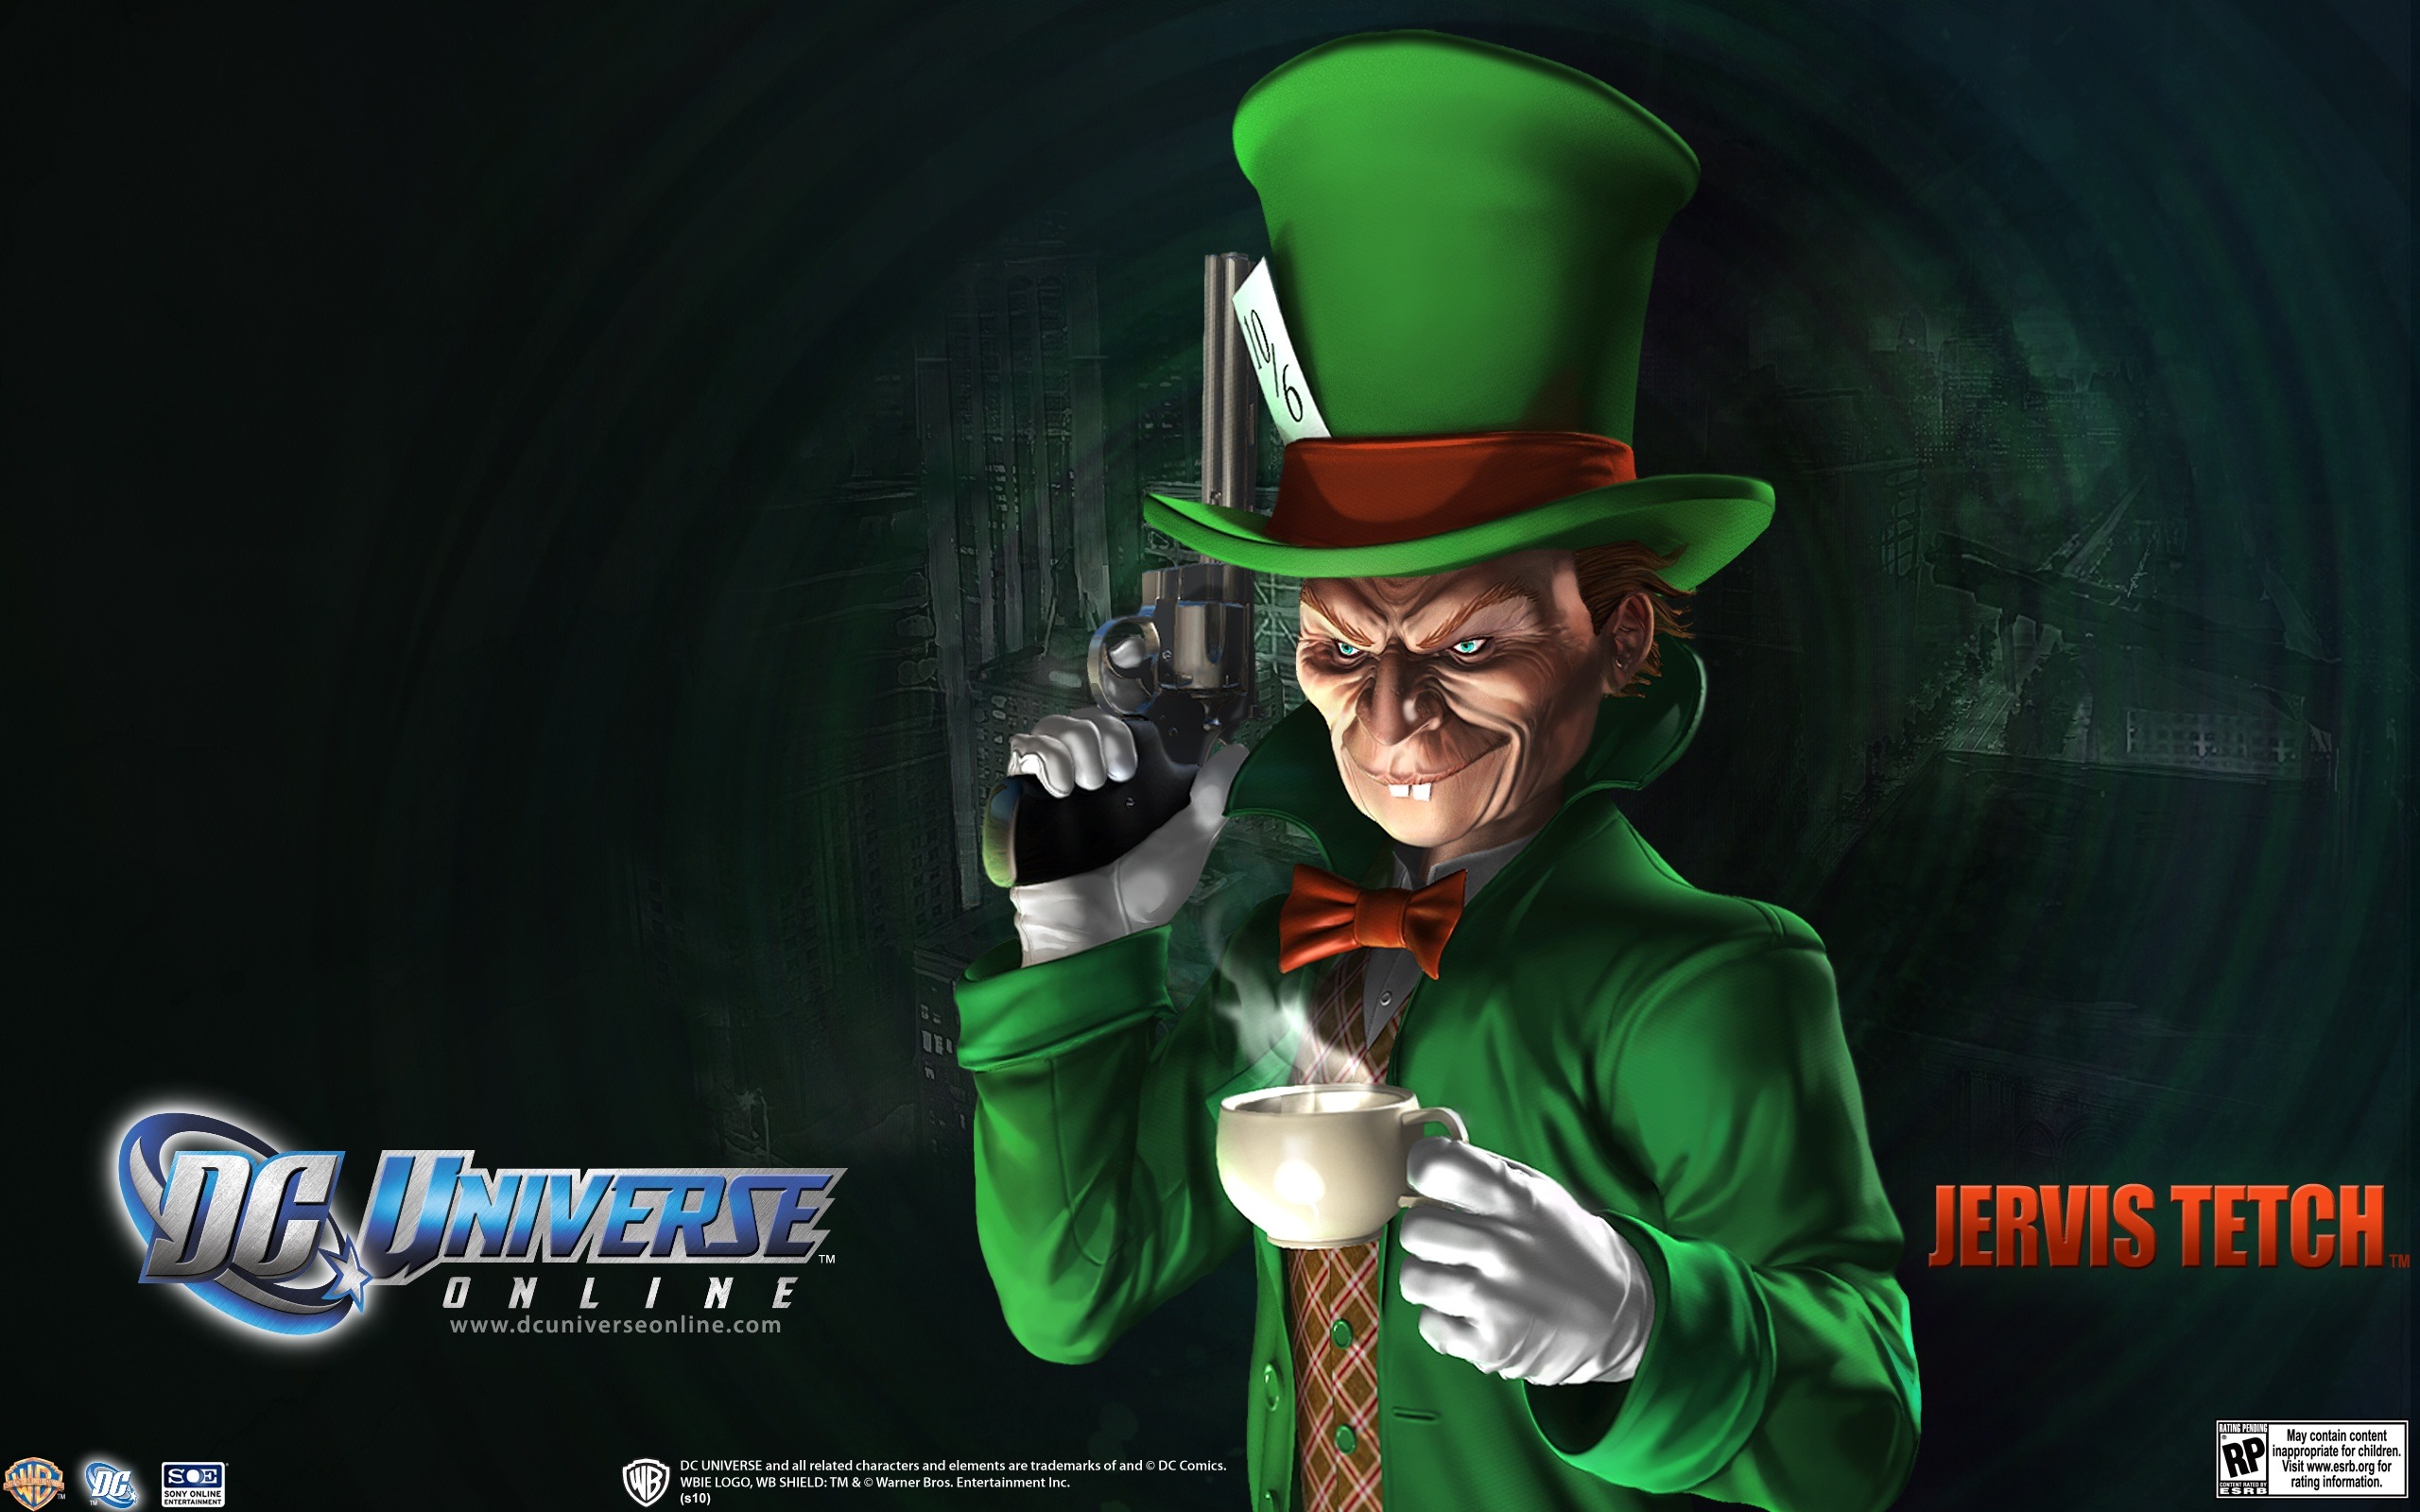 DC Universe Online HD game wallpapers #21 - 2560x1600